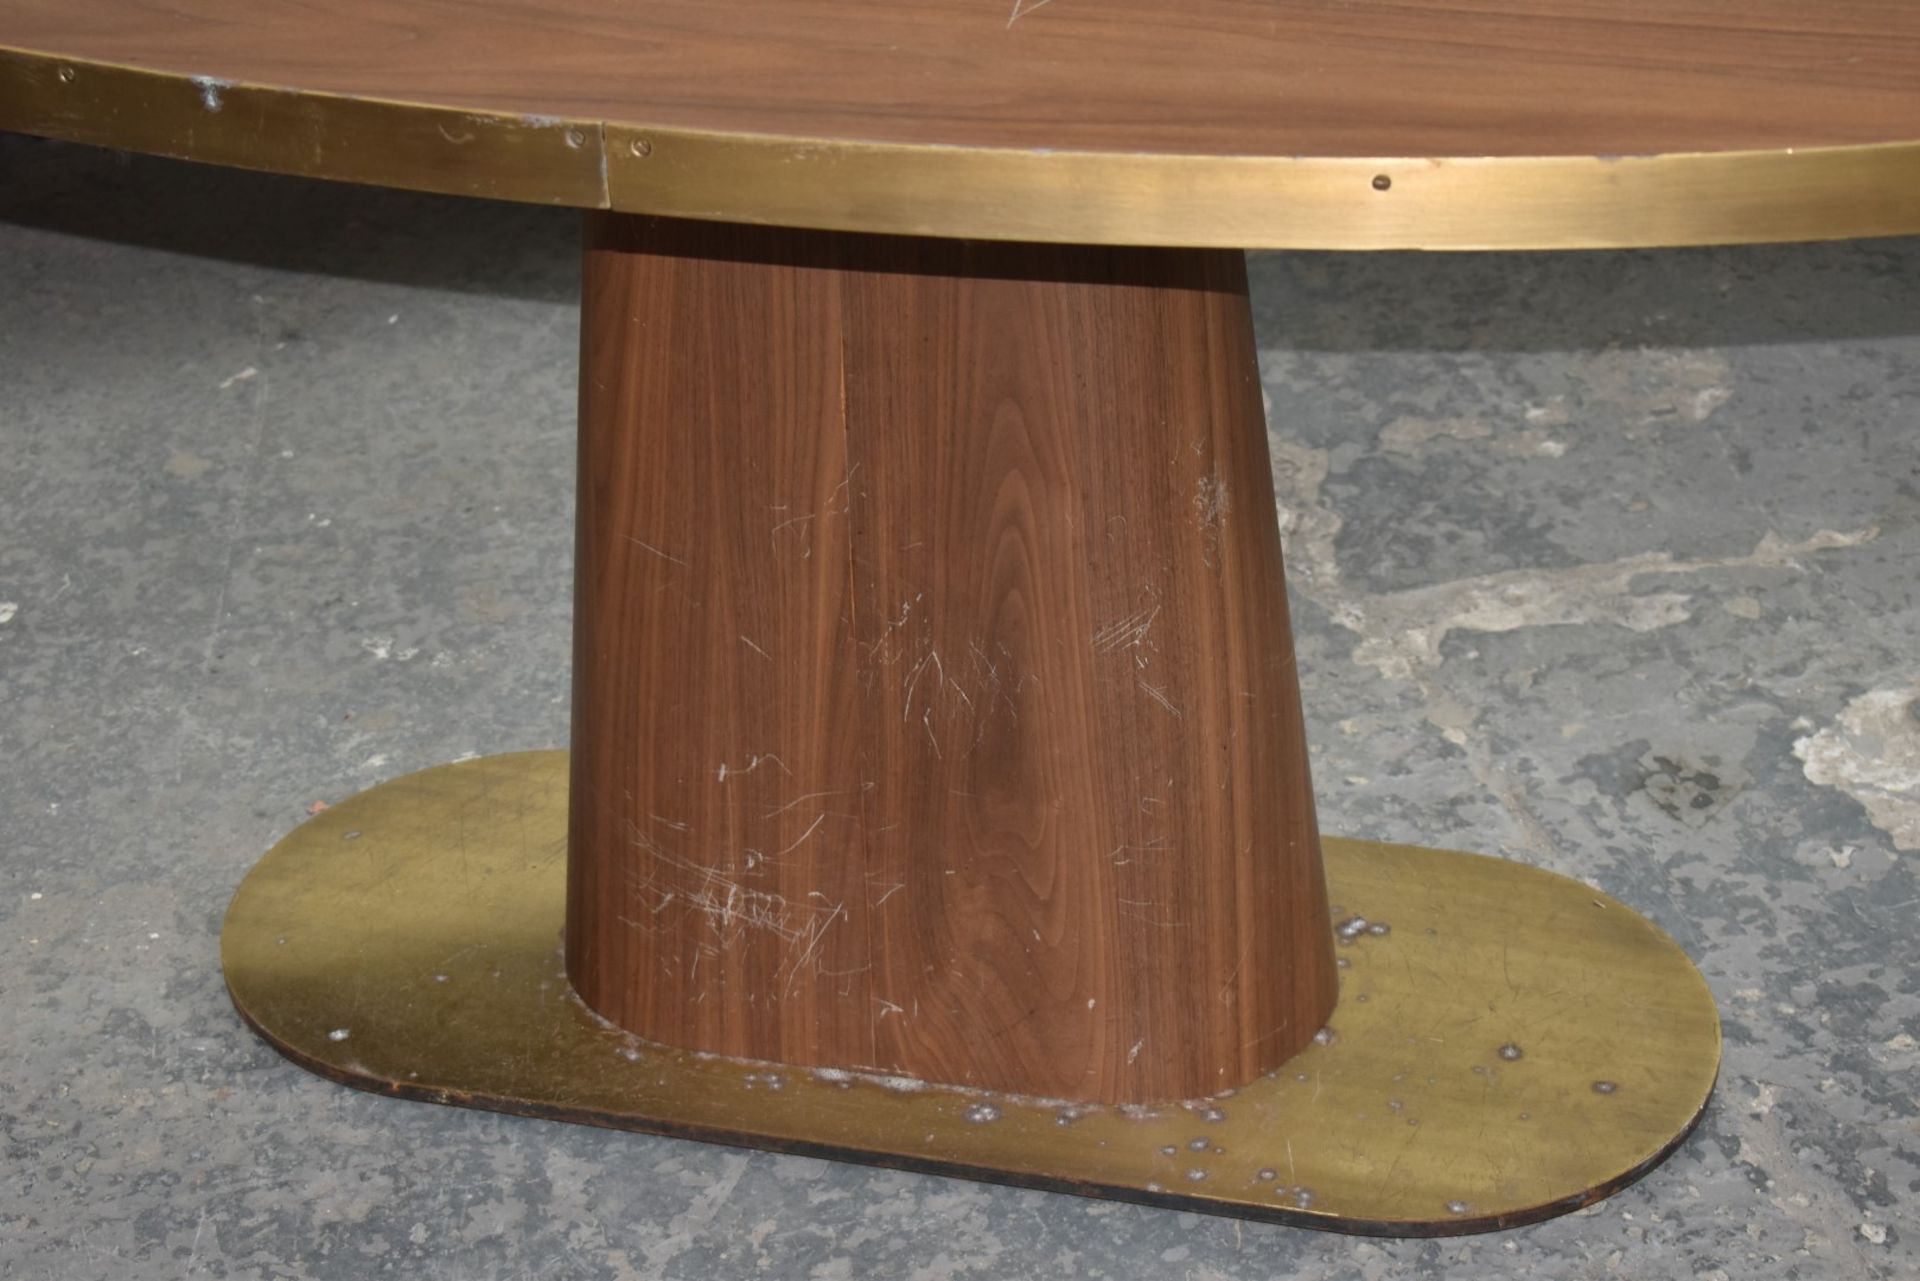 1 x Oval Banqueting Dining Table By AKP Design Athens - Walnut Top With Antique Brass Edging - Image 2 of 10